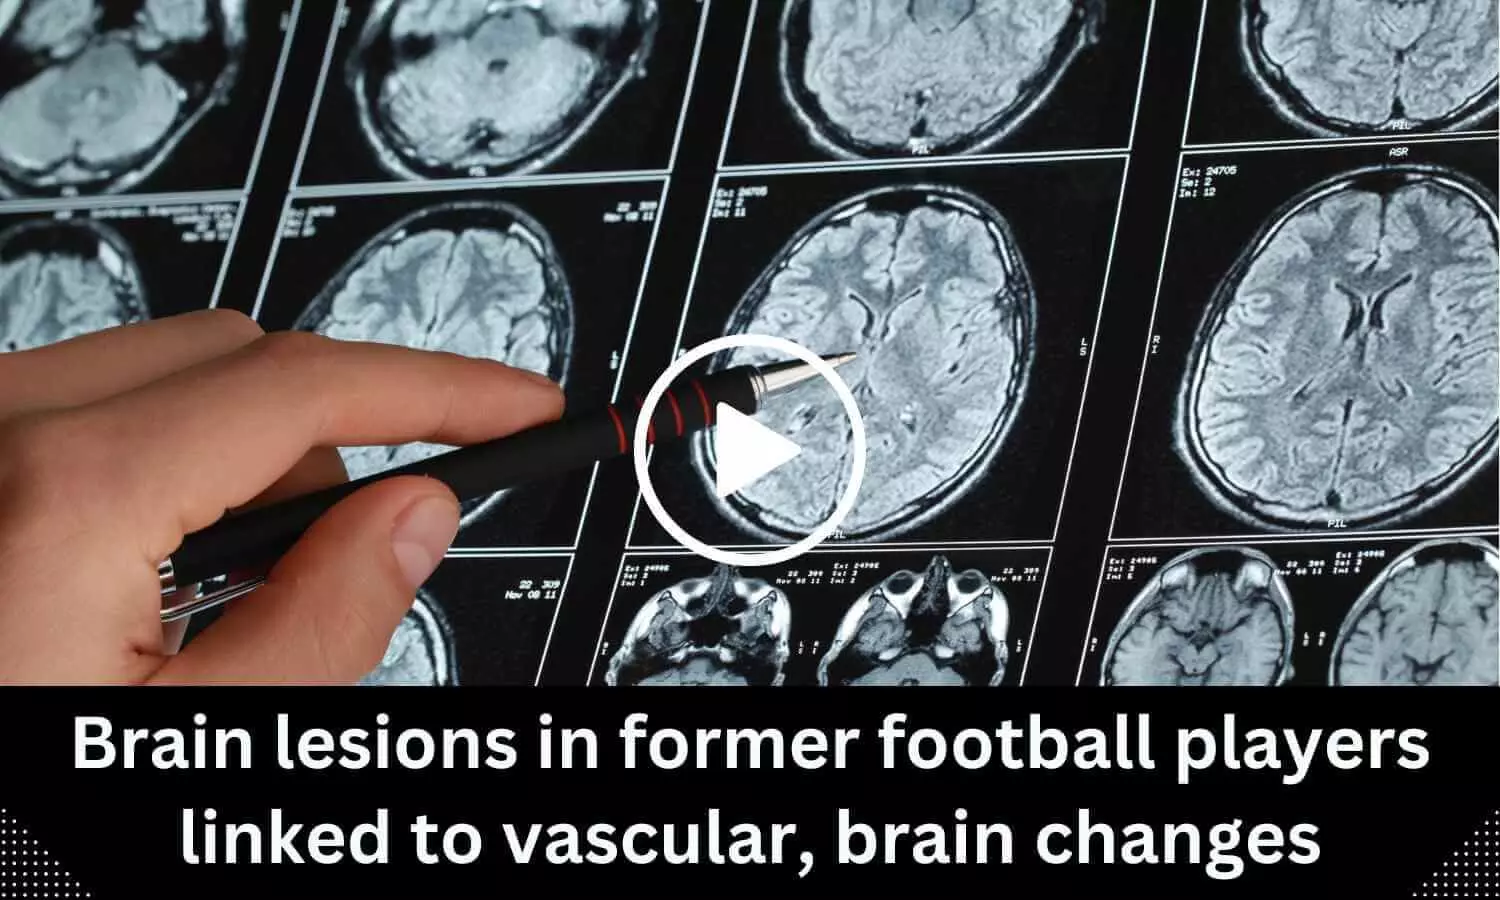 Brain lesions in former football players linked to vascular, brain changes